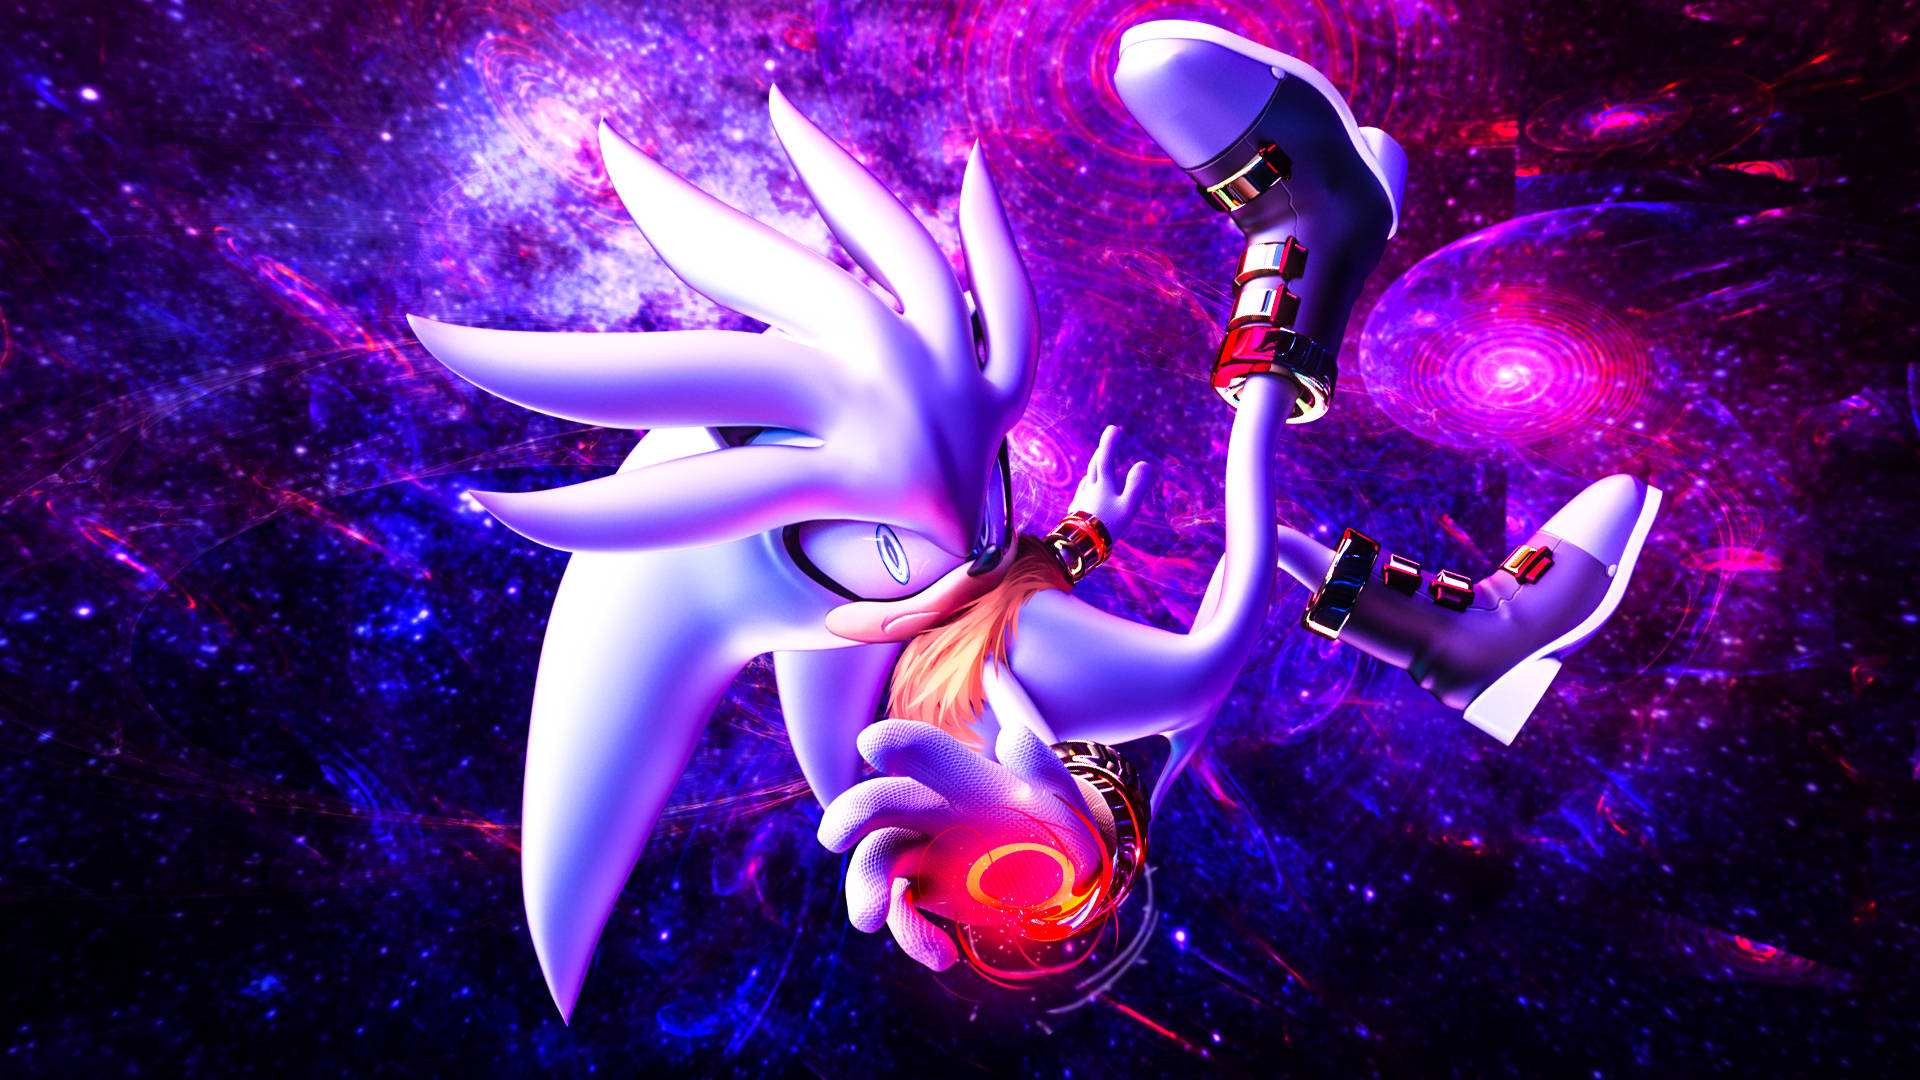 Silver The Hedgehog In Battle Stance Background